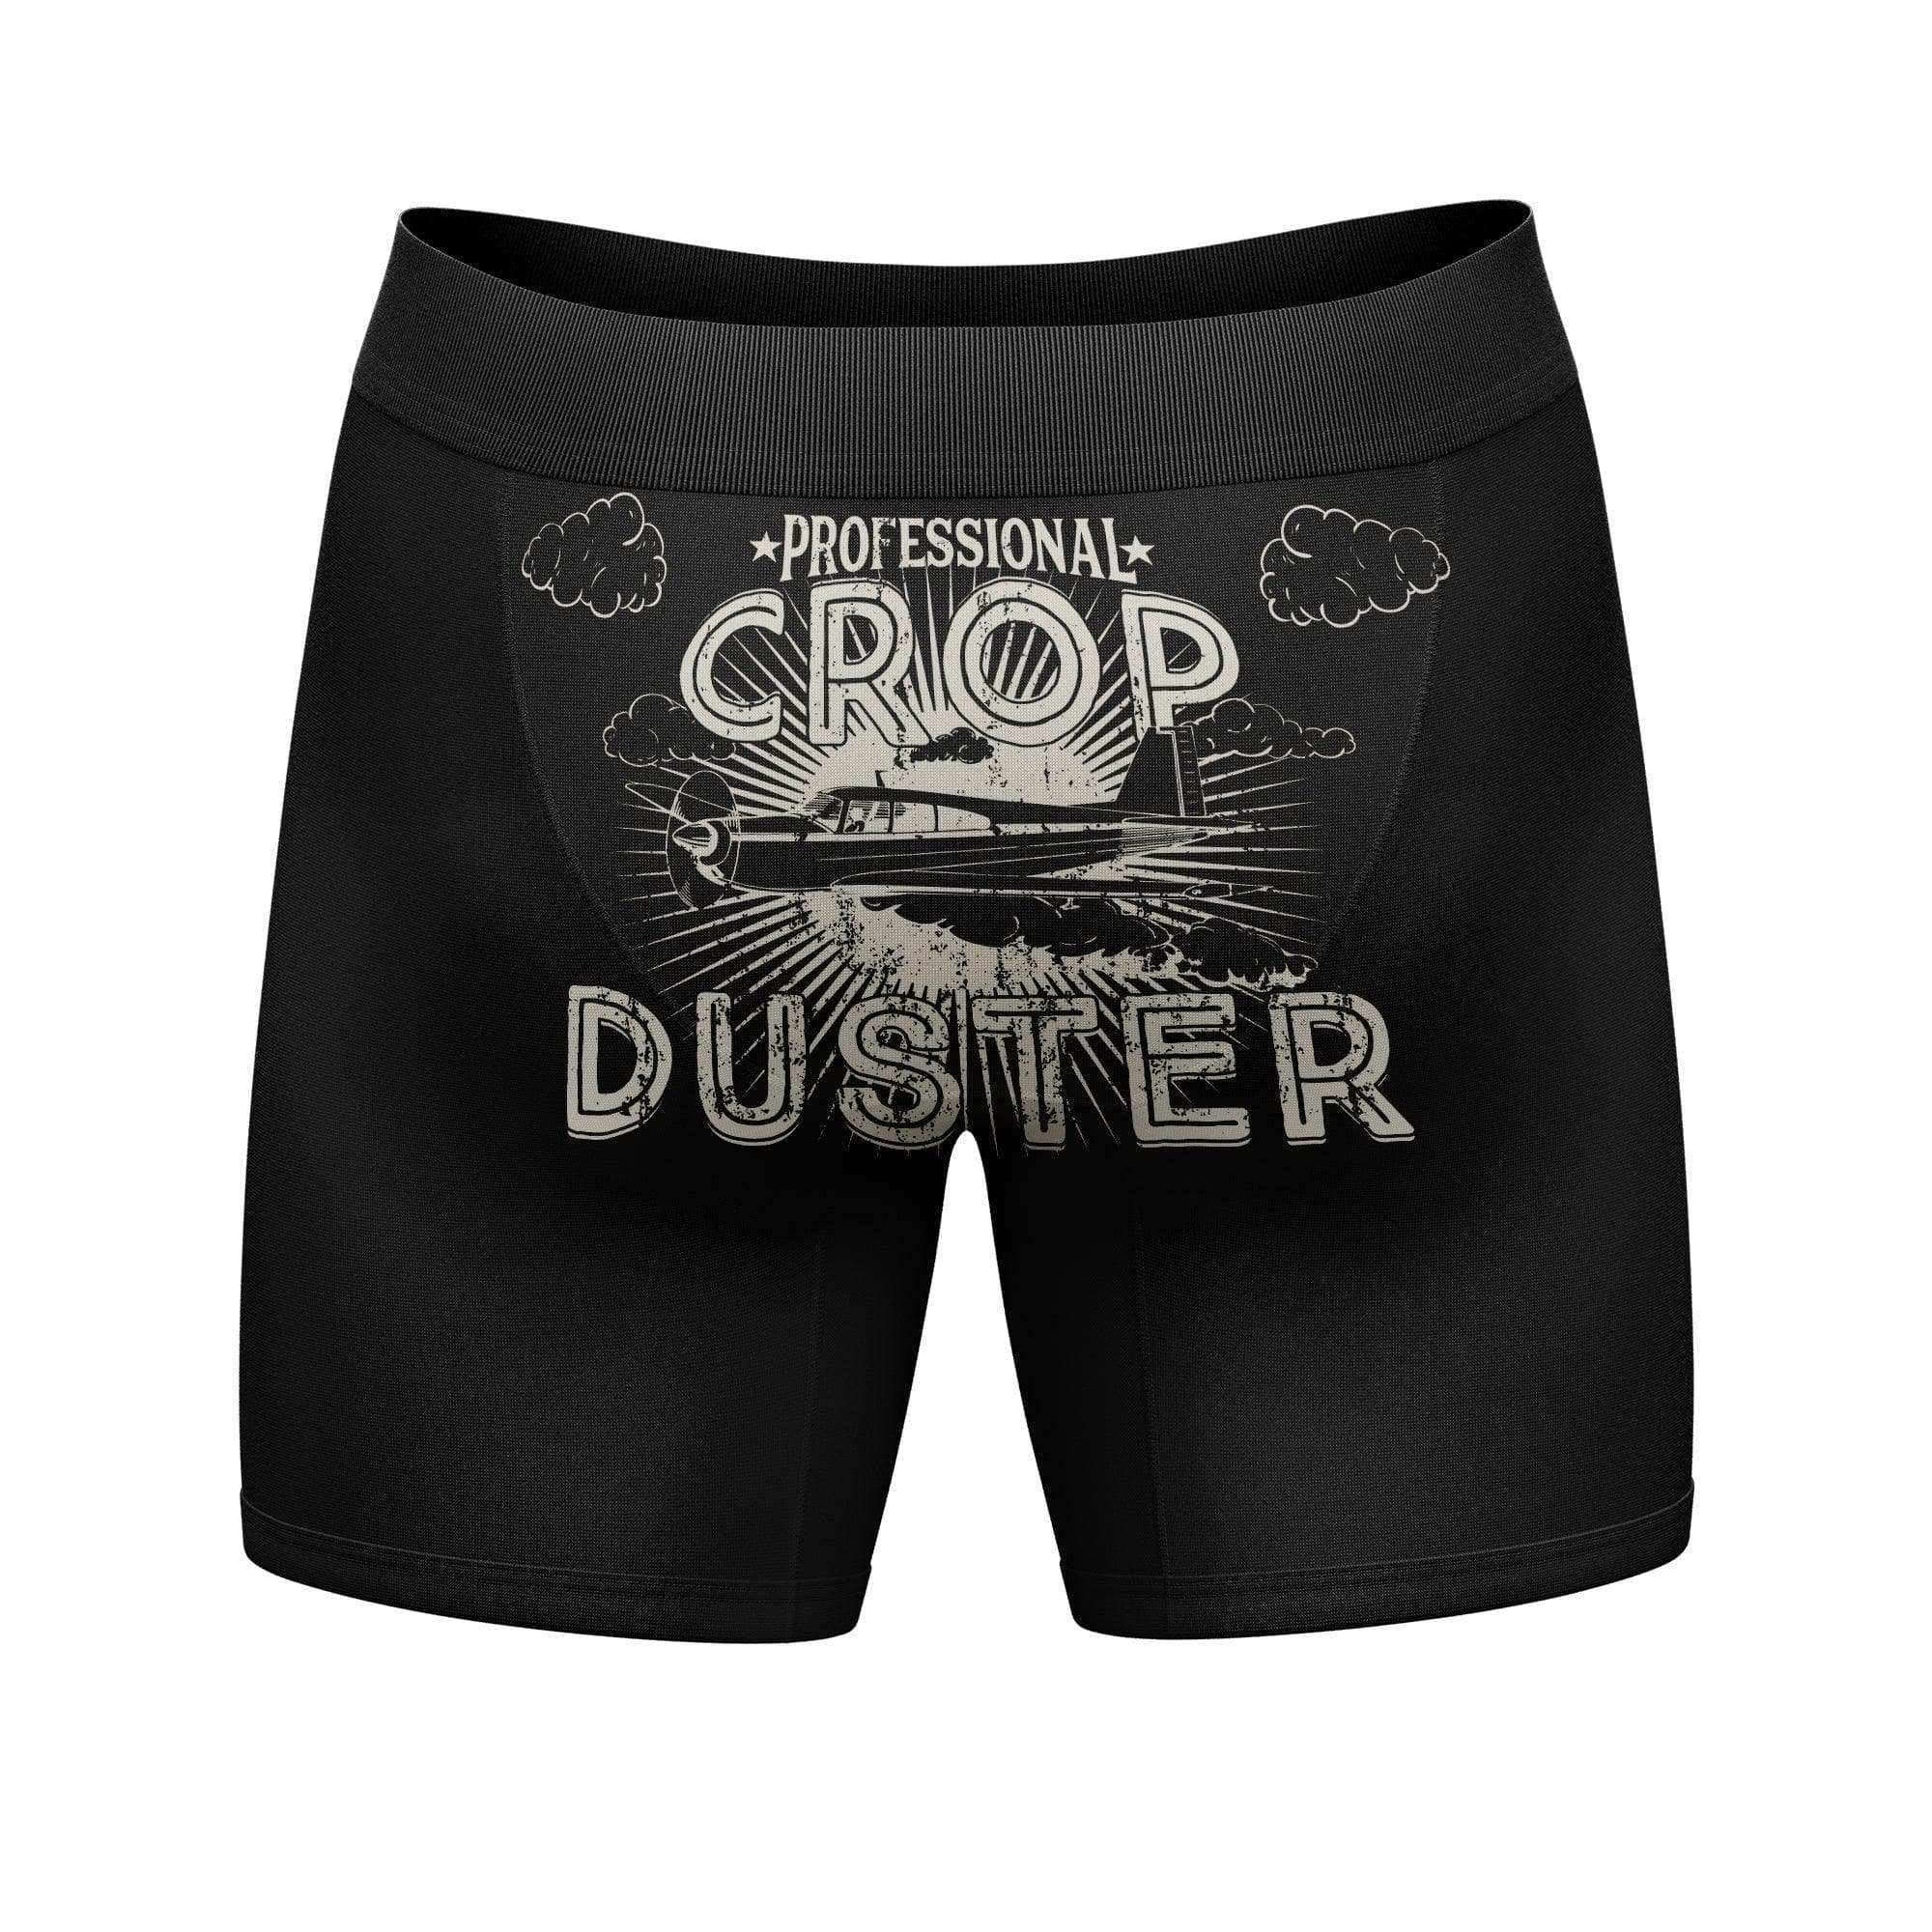 Professional Crop Duster  -  Crazy Dog T-Shirts